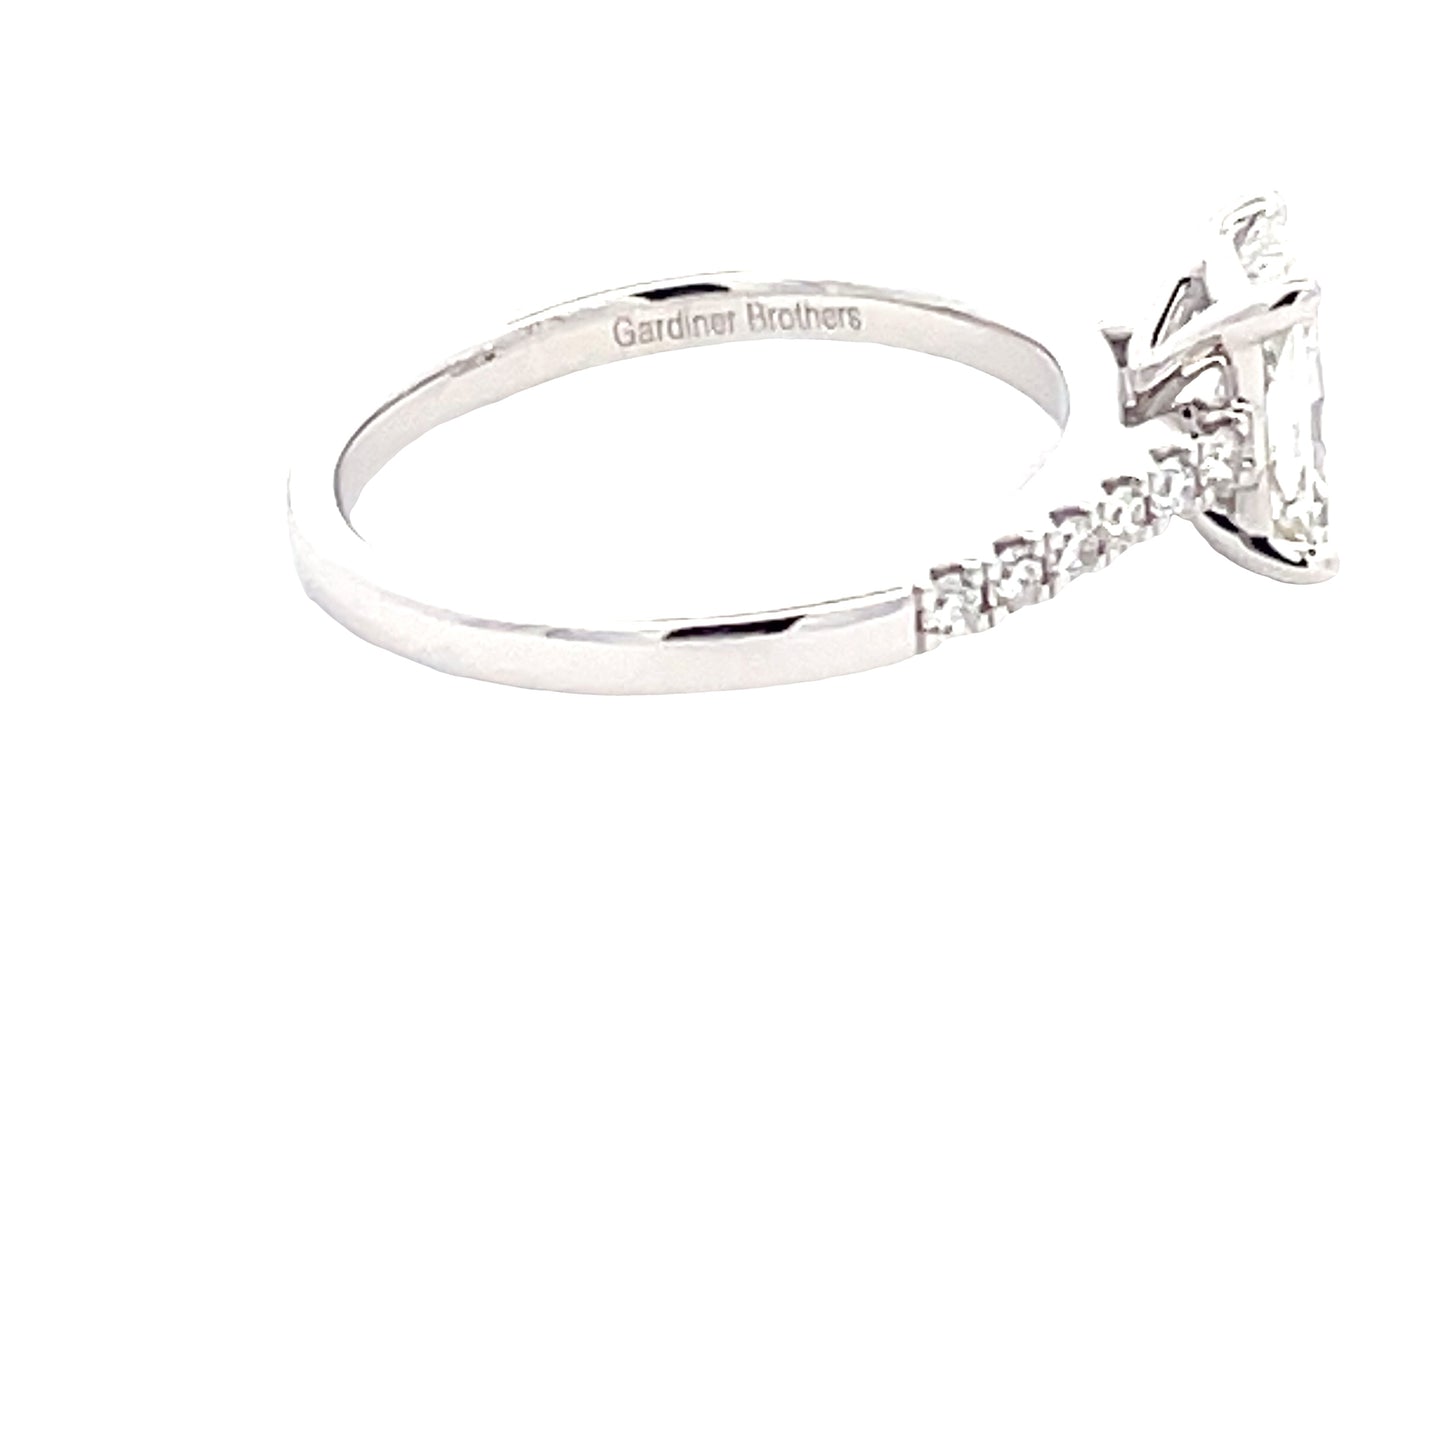 Radiant Cut Diamond Solitaire Ring with diamond set shoulders - 1.28cts  Gardiner Brothers   